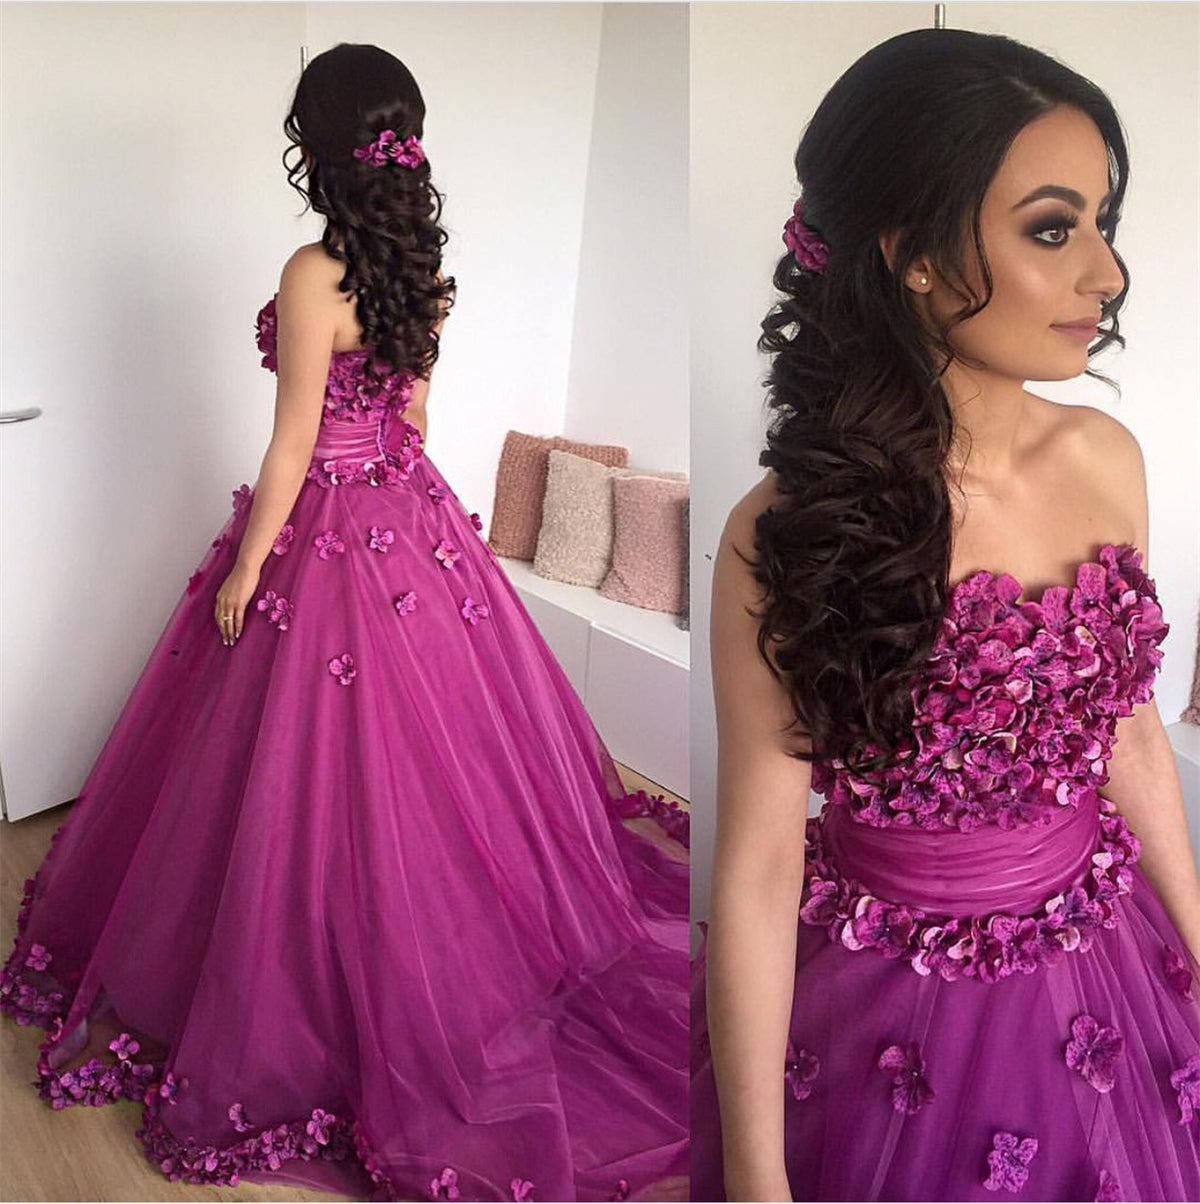 WD3680 Chic handmade Flowers Ball Gown Engagement Dress for Reception Wedding Dress Formal Prom Gown 2018